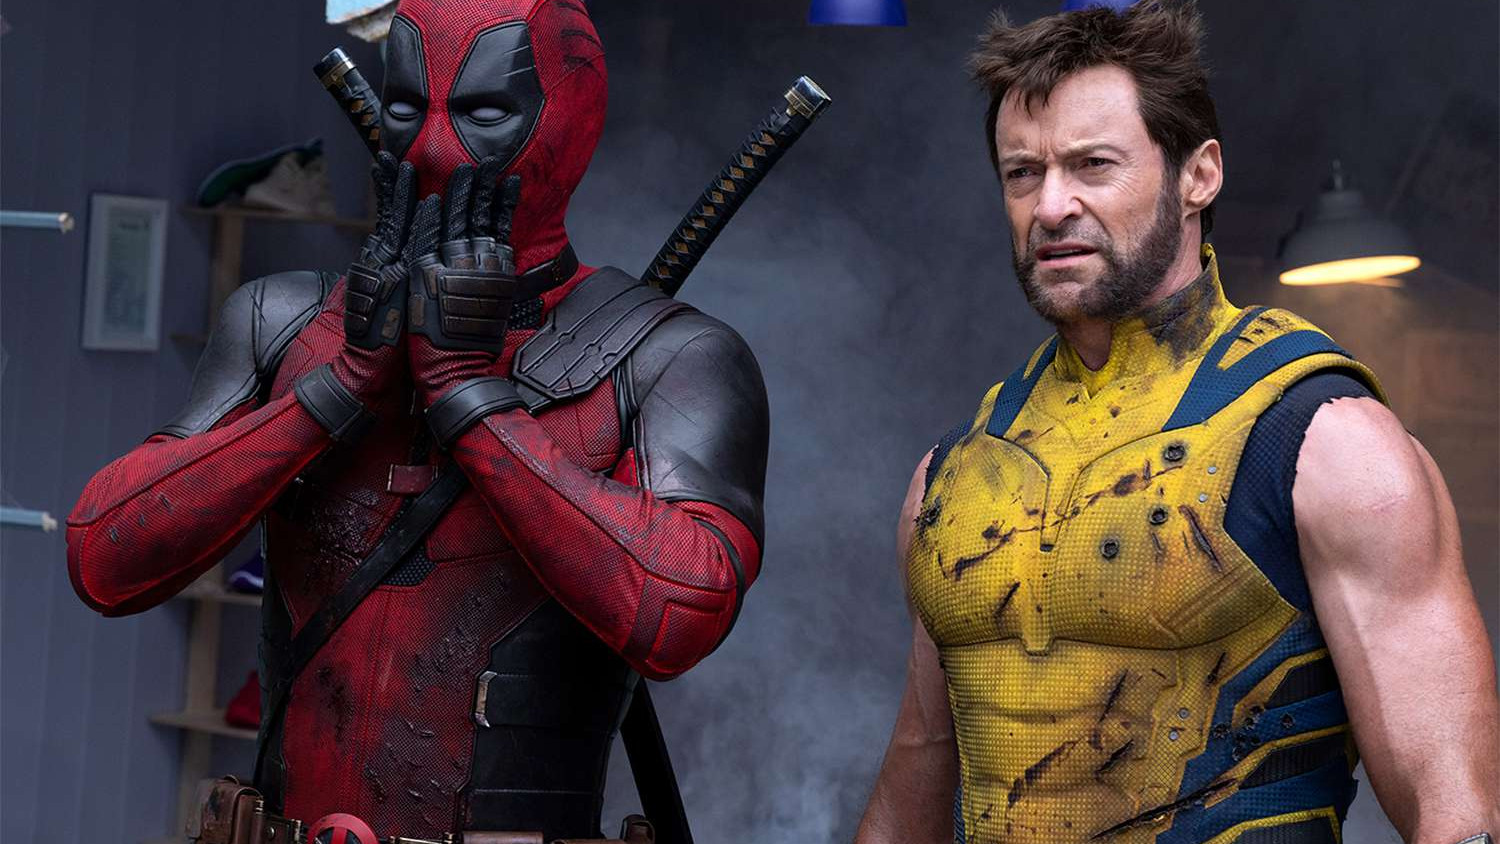 Kevin Feige Confirms Deadpool Comic-Con Panel: Two Marvel Studios Panels